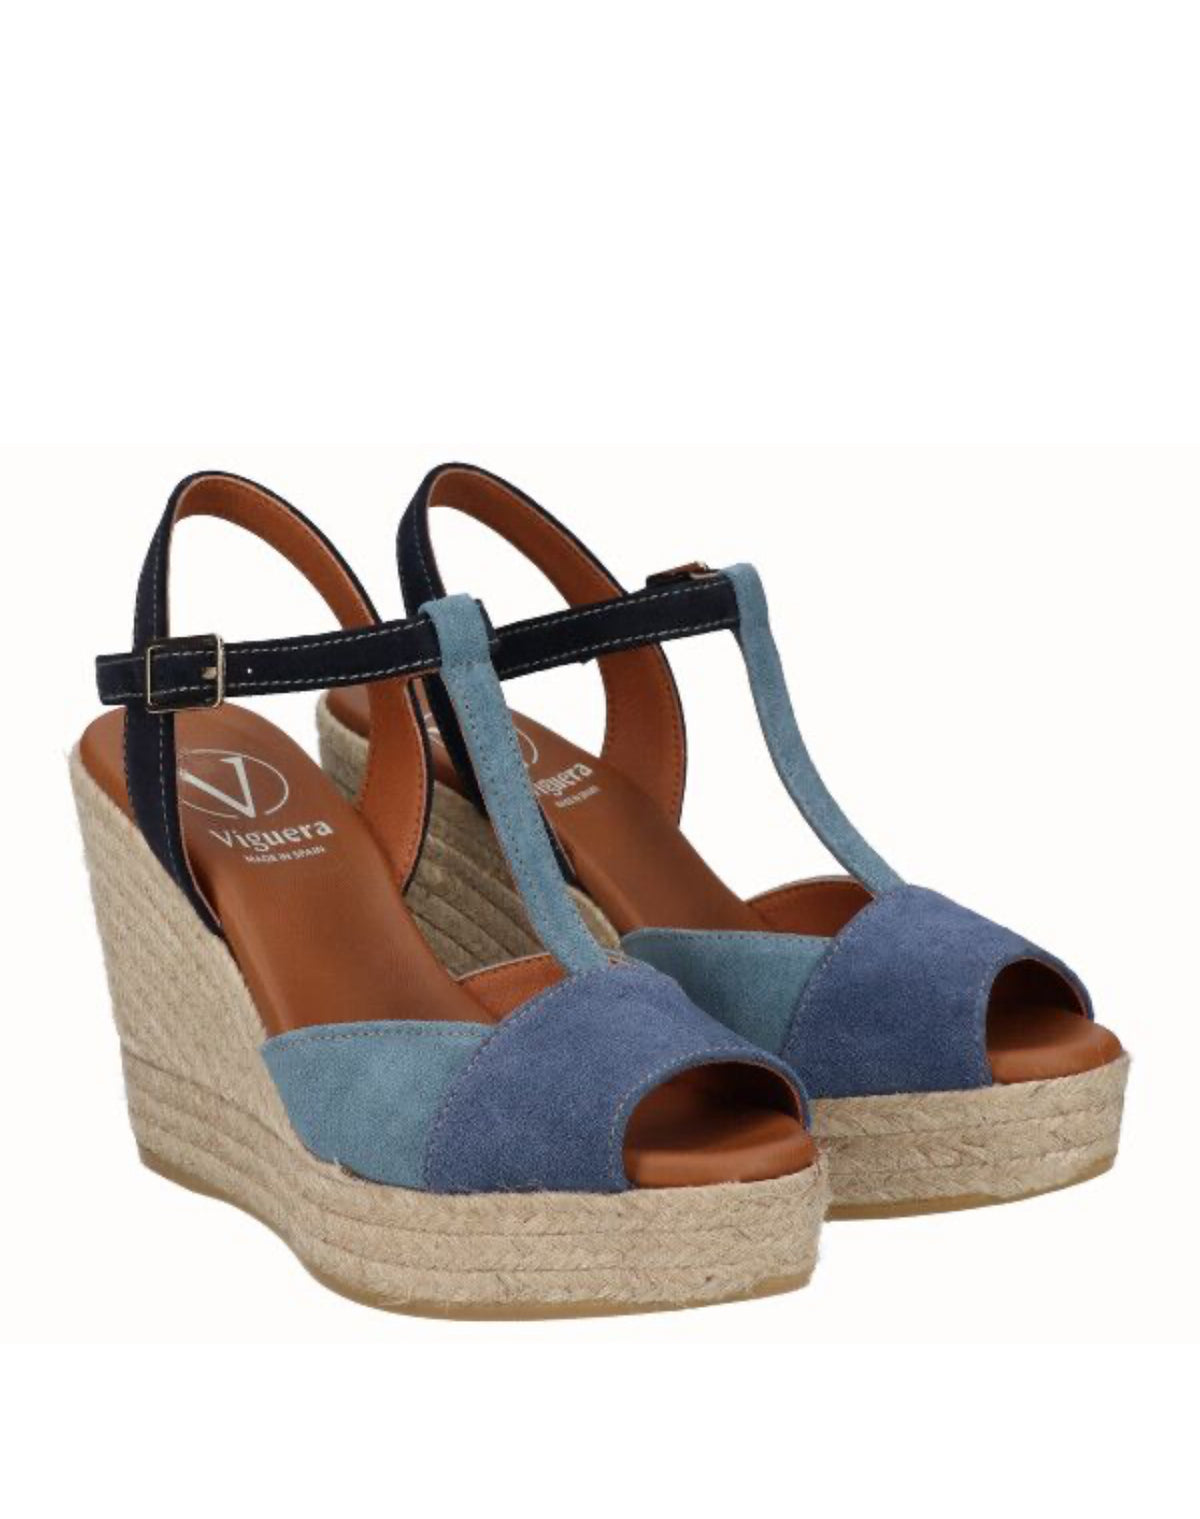 Viguera - 2150 Navy and Blue Wedge Sandal